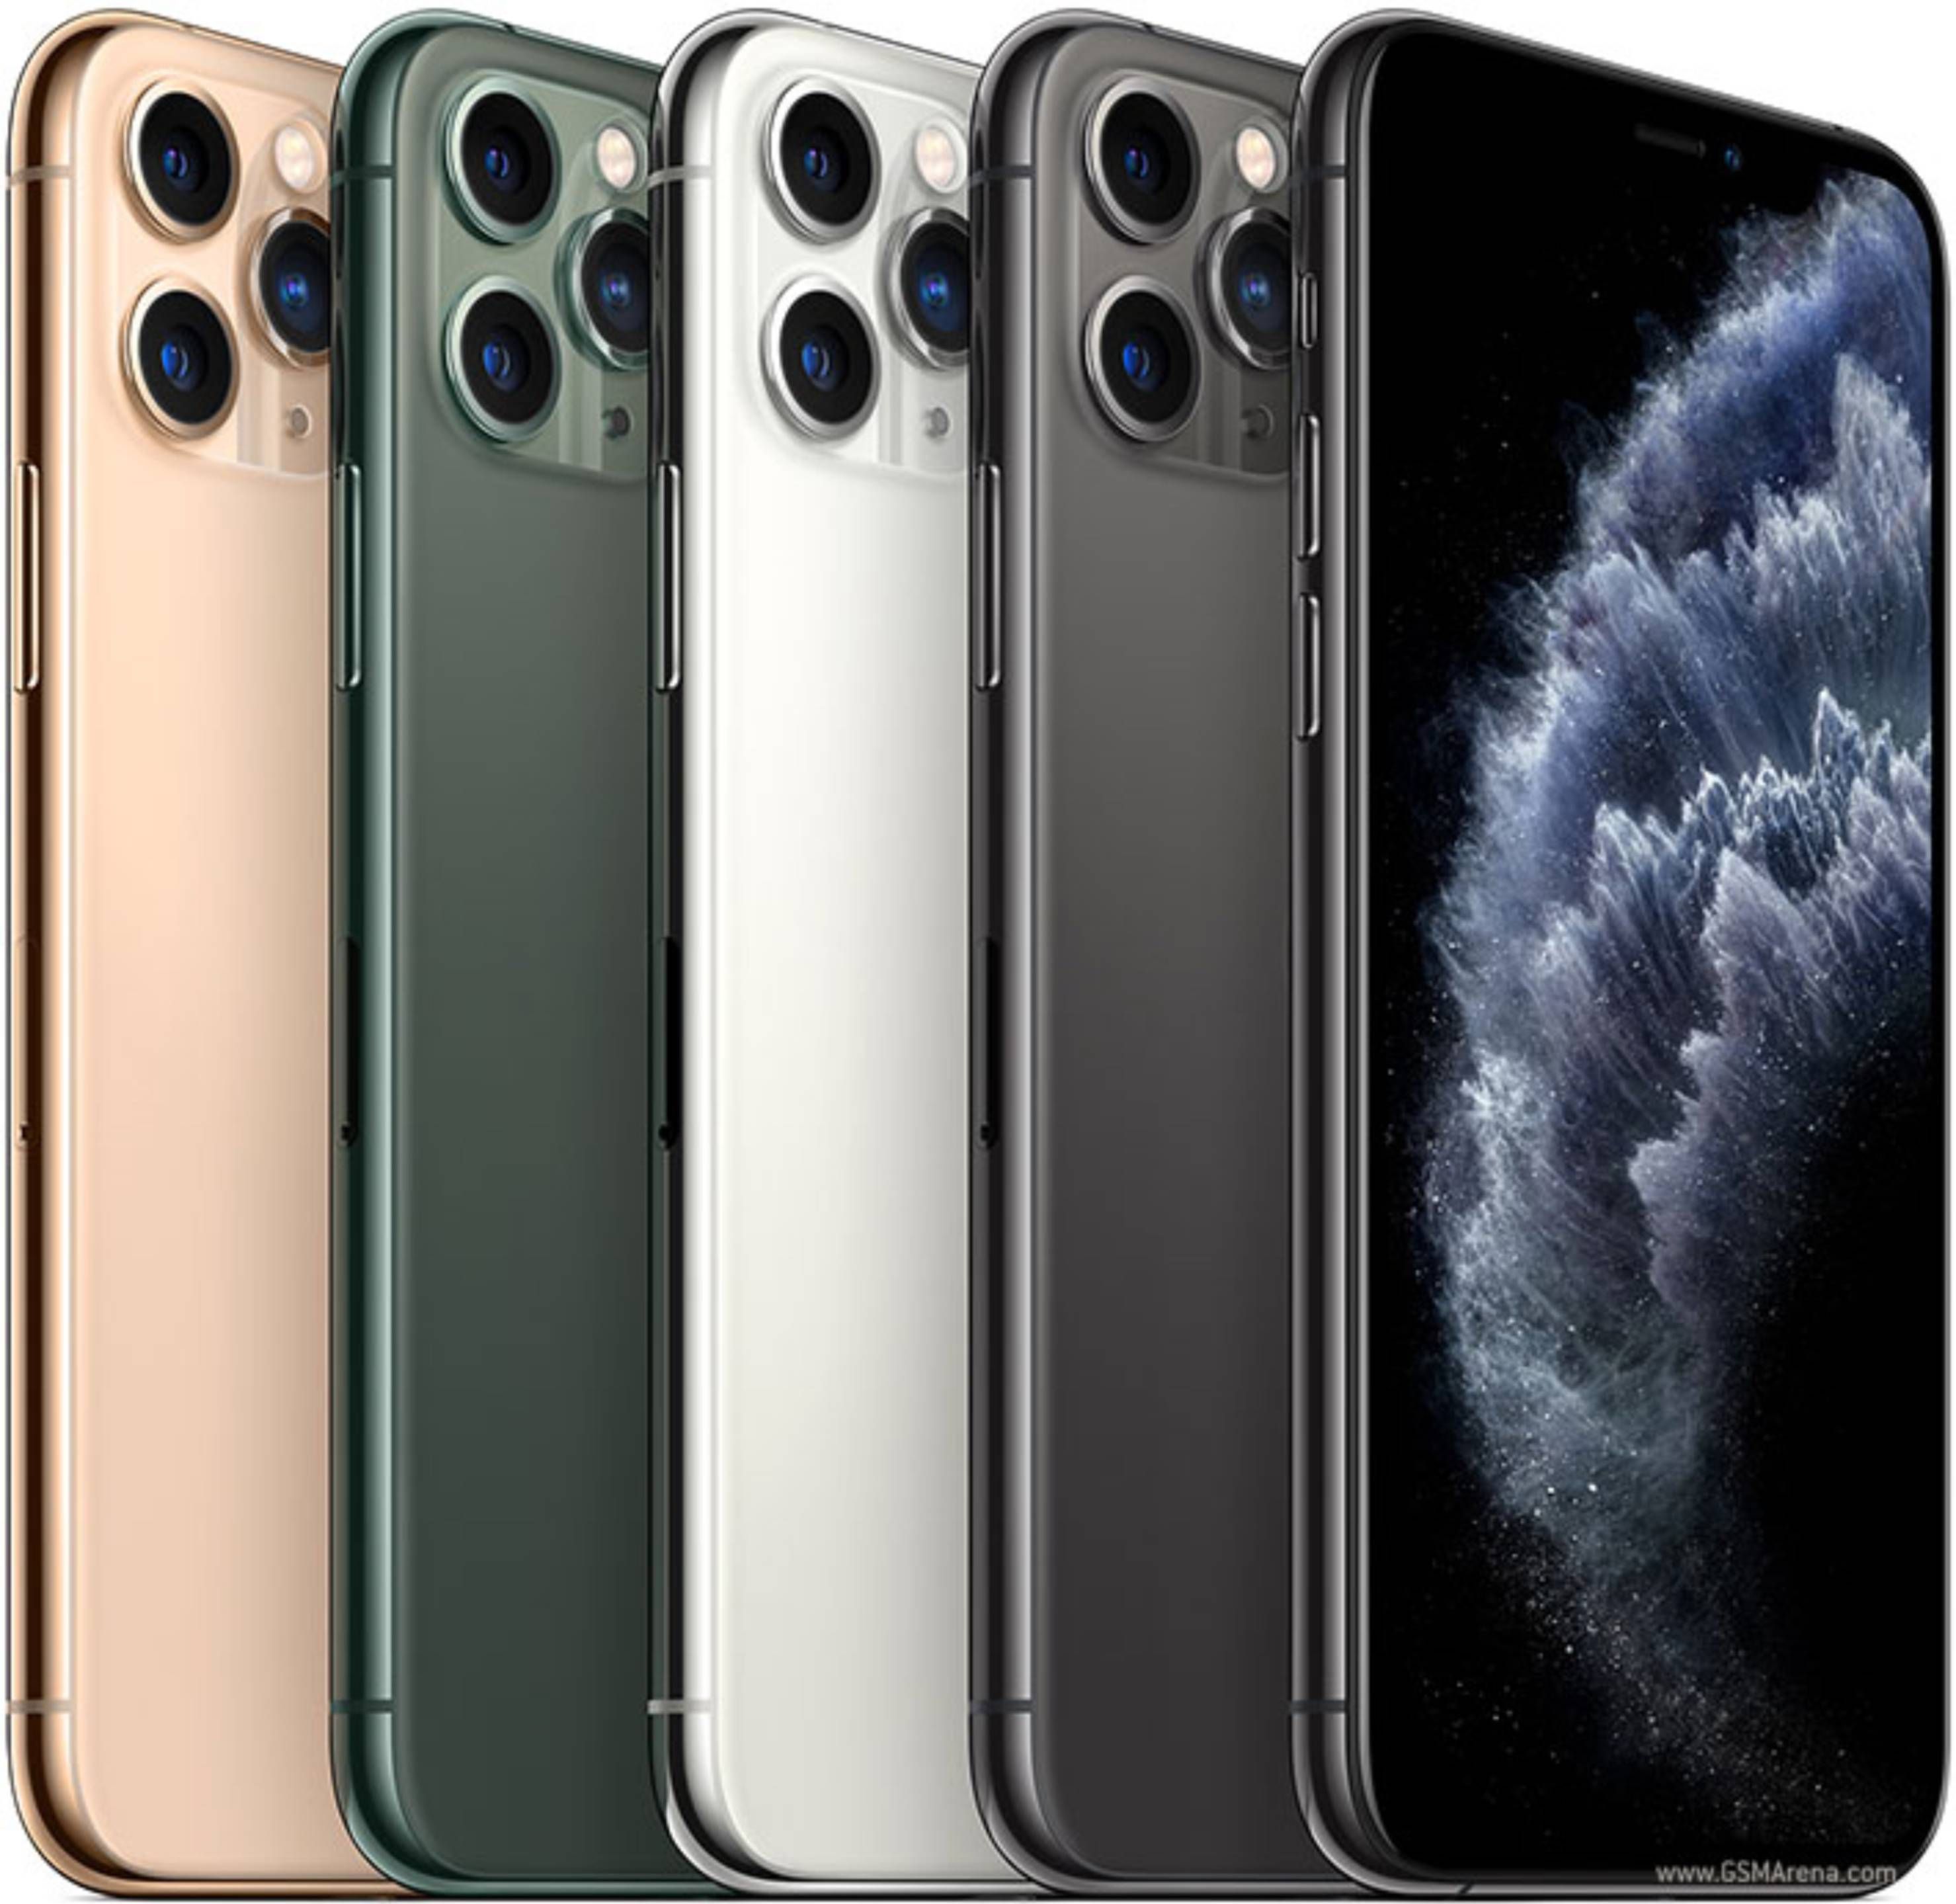 Apple iPhone 11 Pro Max Specifications and Price in Kenya